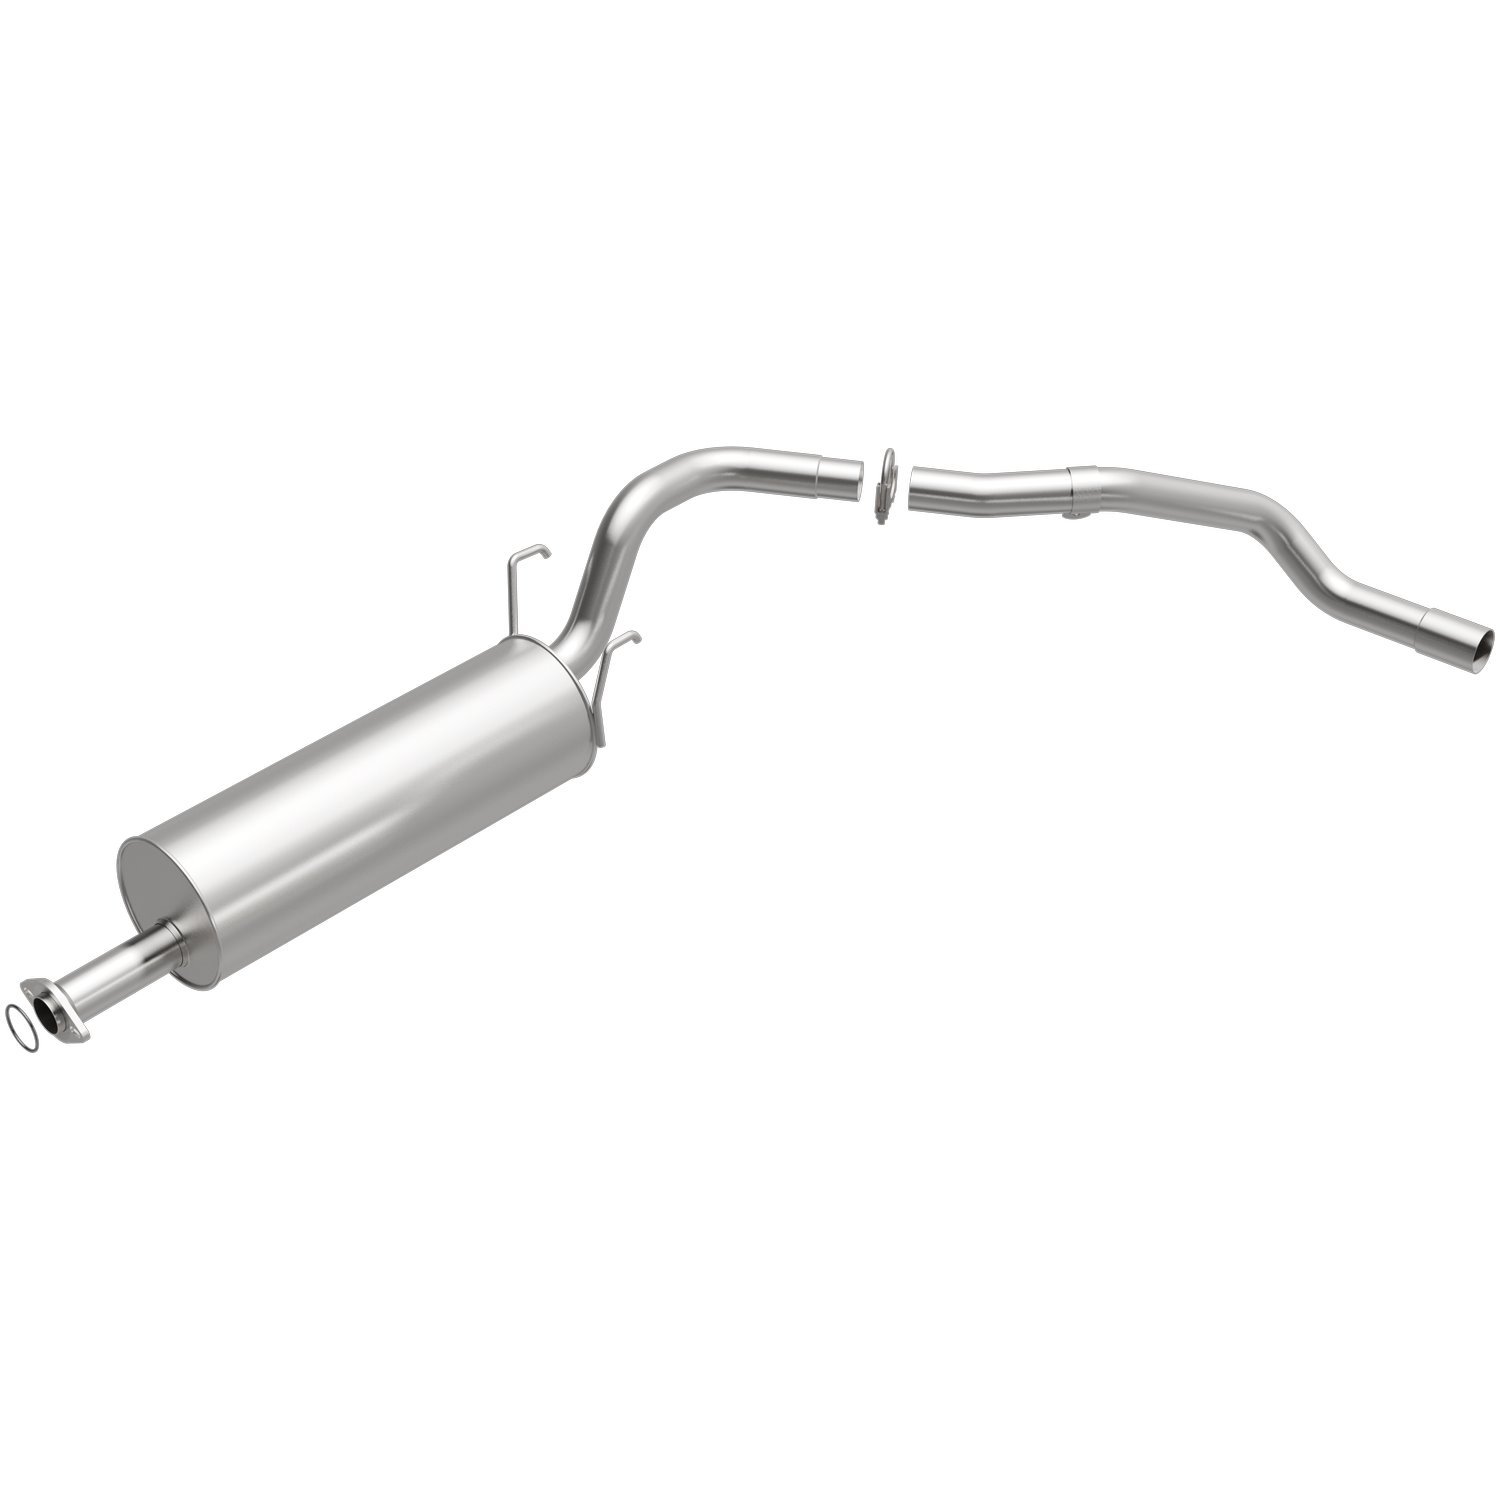 Direct-Fit Exhaust Kit, 1992-1995 Toyota 4Runner 3.0L